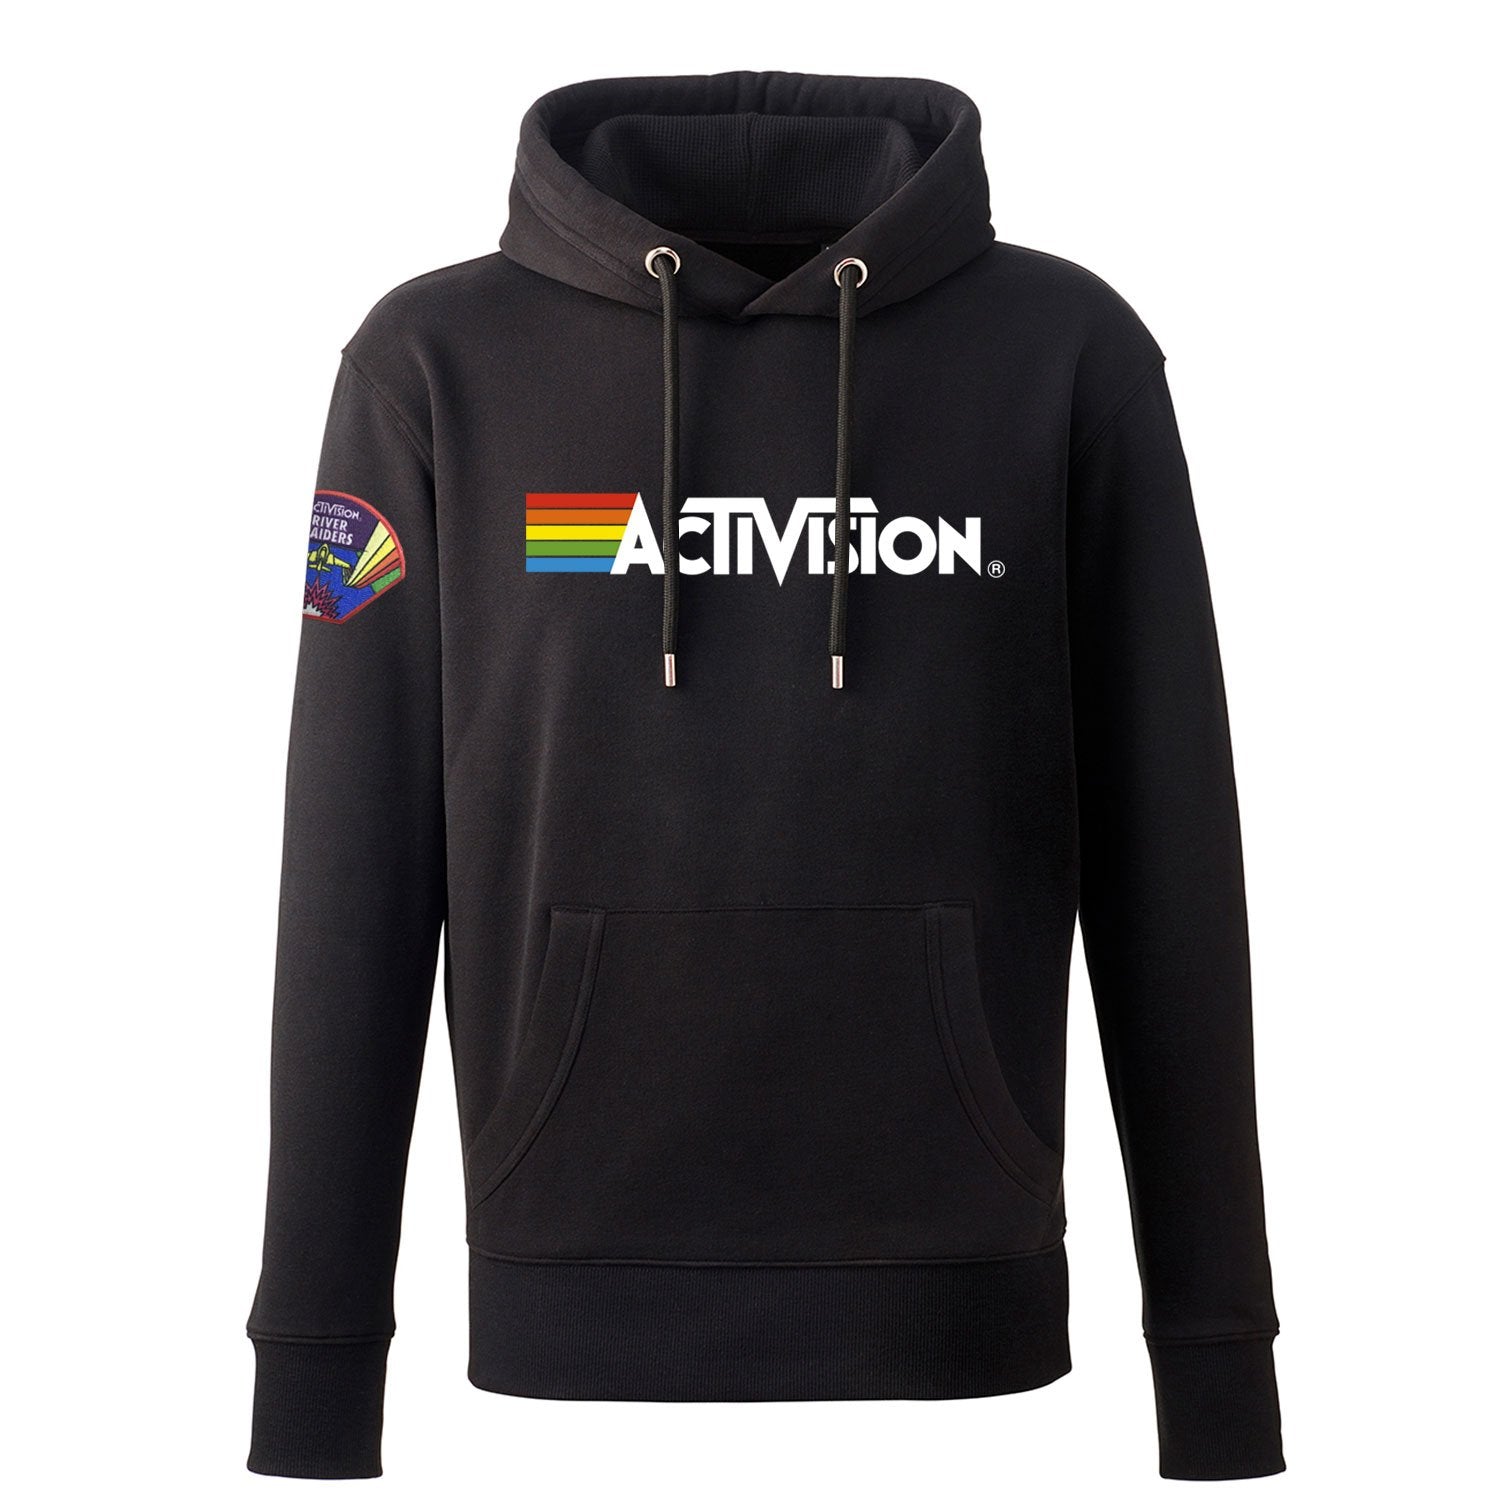 River Raiders Patch, Activision Logo Men's Hoody, Black Pullover in Unisex Fit with Kangaroo Pocket